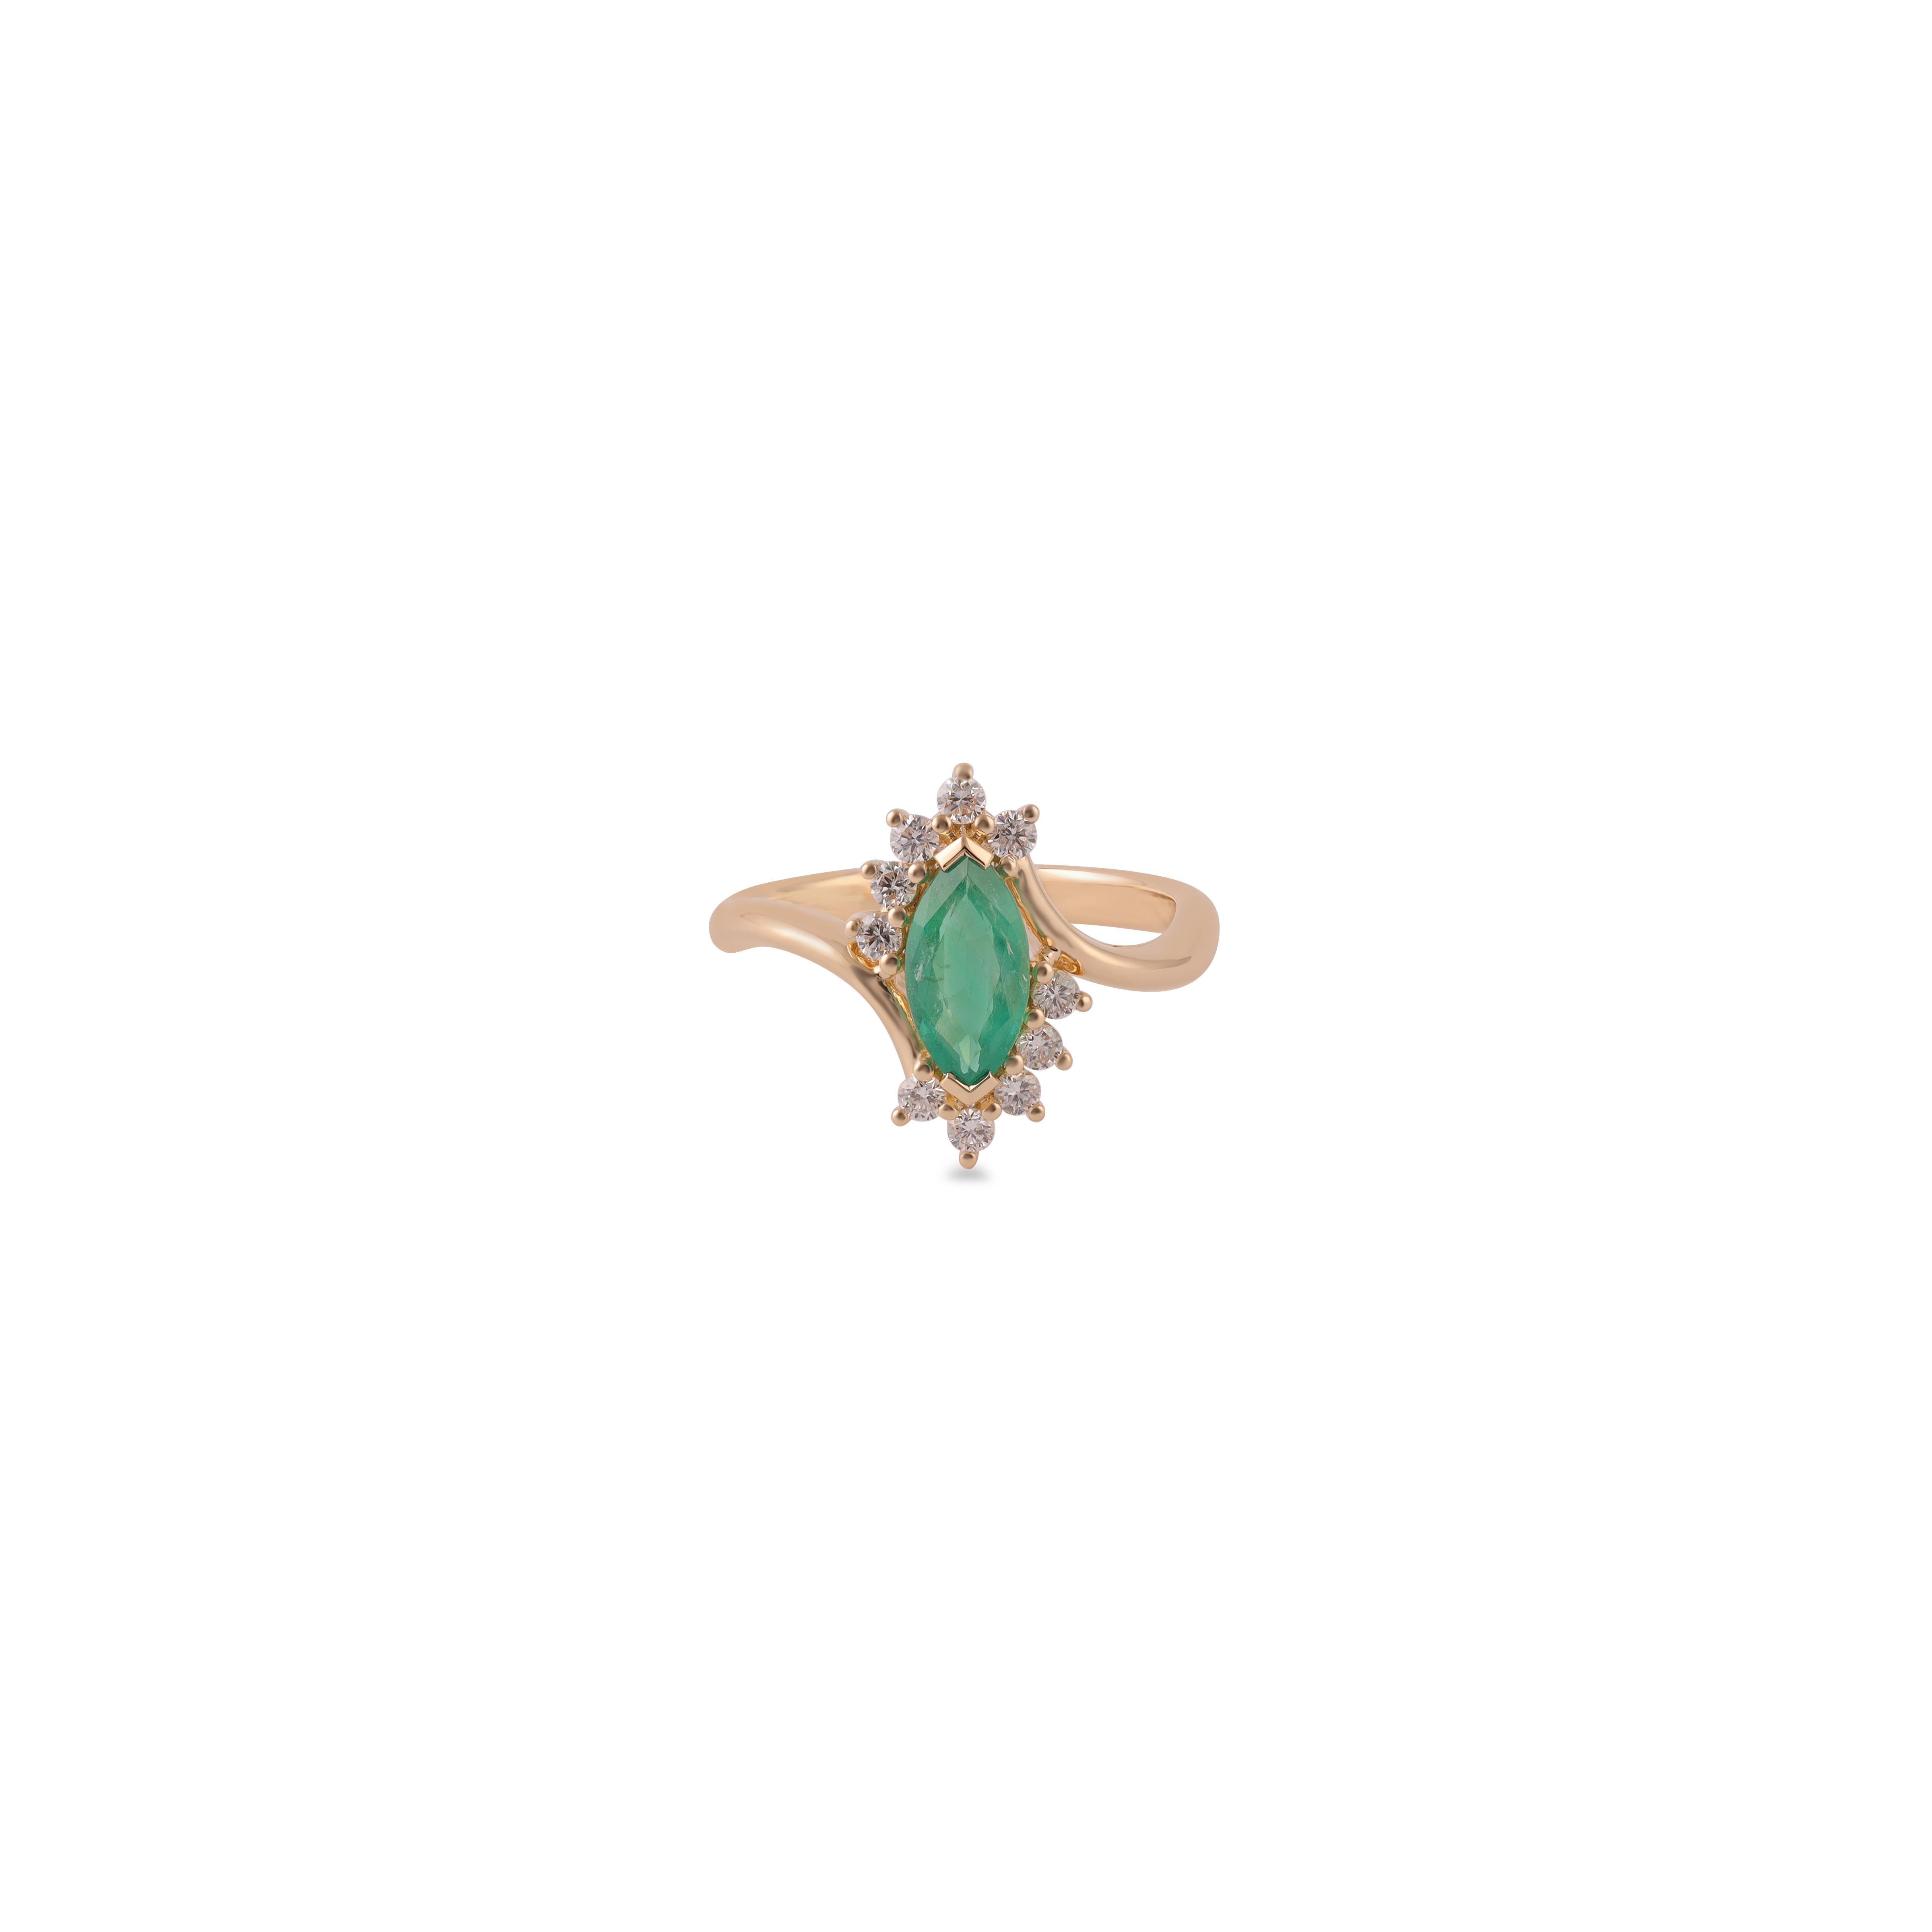 Magnificent  Emerald ring.  
 Emerald & Diamond Ring 18K Yellow Gold 

 Emerald - 0.80 Carat
Diamond - 0.29 Carat
18 Karat Yellow Gold




Custom Services
Resizing is available.
Request Customization
